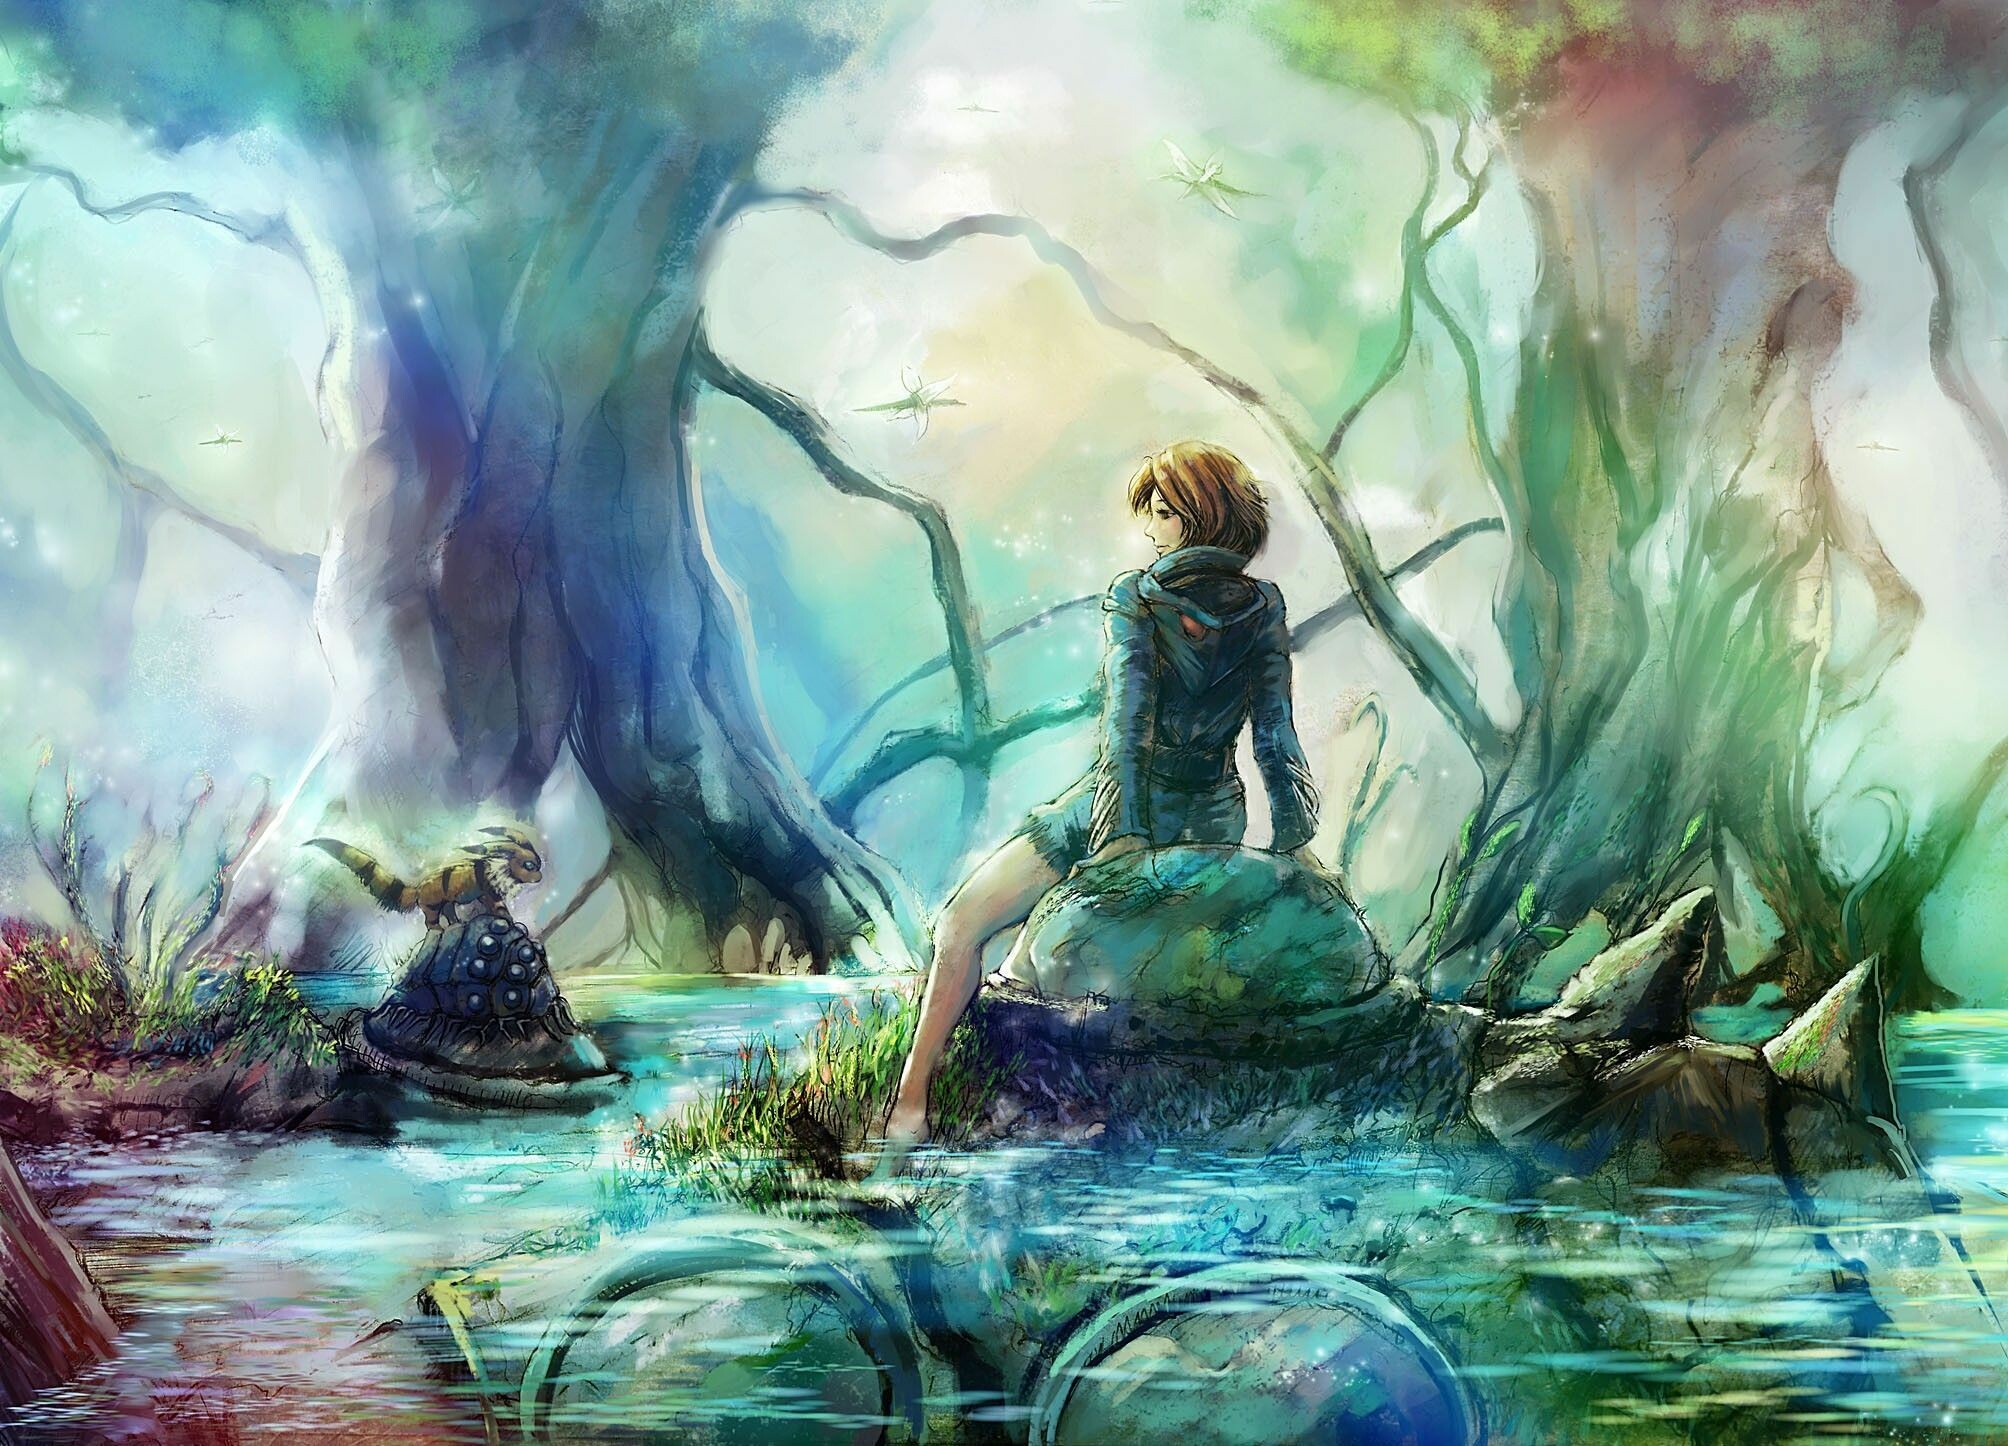 Nausicaa of the Valley of the Wind: One of Hayao Miyazaki's first films, Post-apocalyptic. 2010x1450 HD Wallpaper.